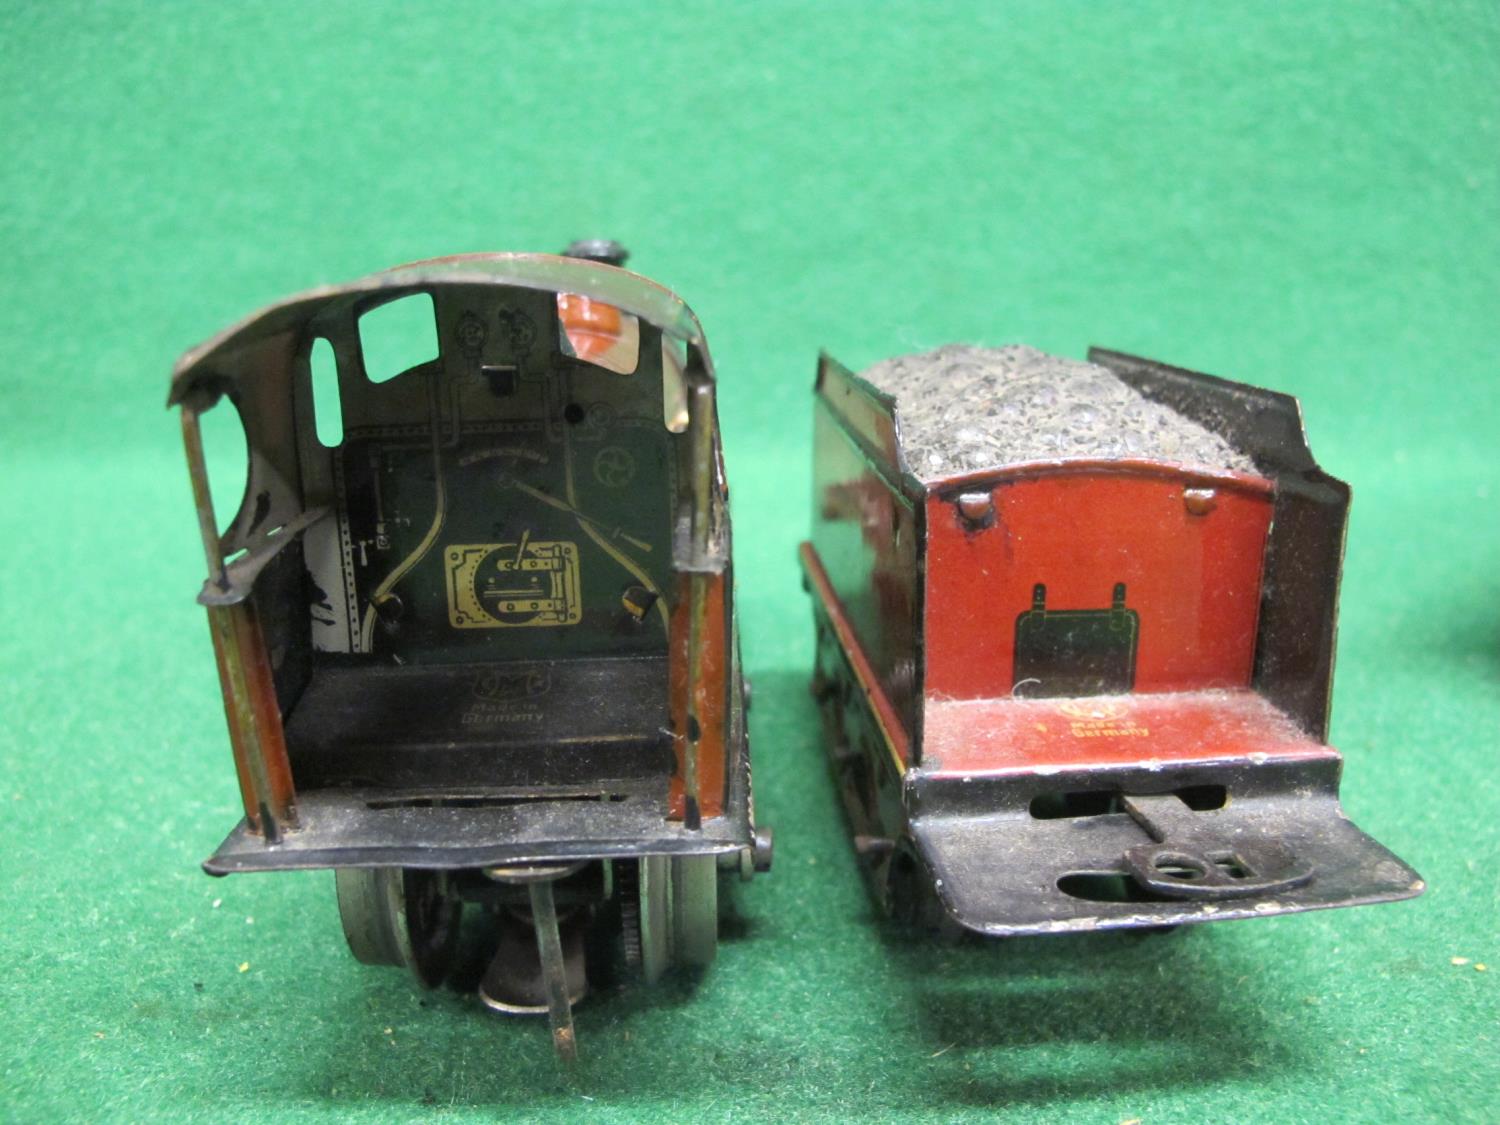 Marklin 4 volt O gauge 4-4-0 locomotive and tender No. 385 in lined red, two Bogie coaches with - Image 8 of 8